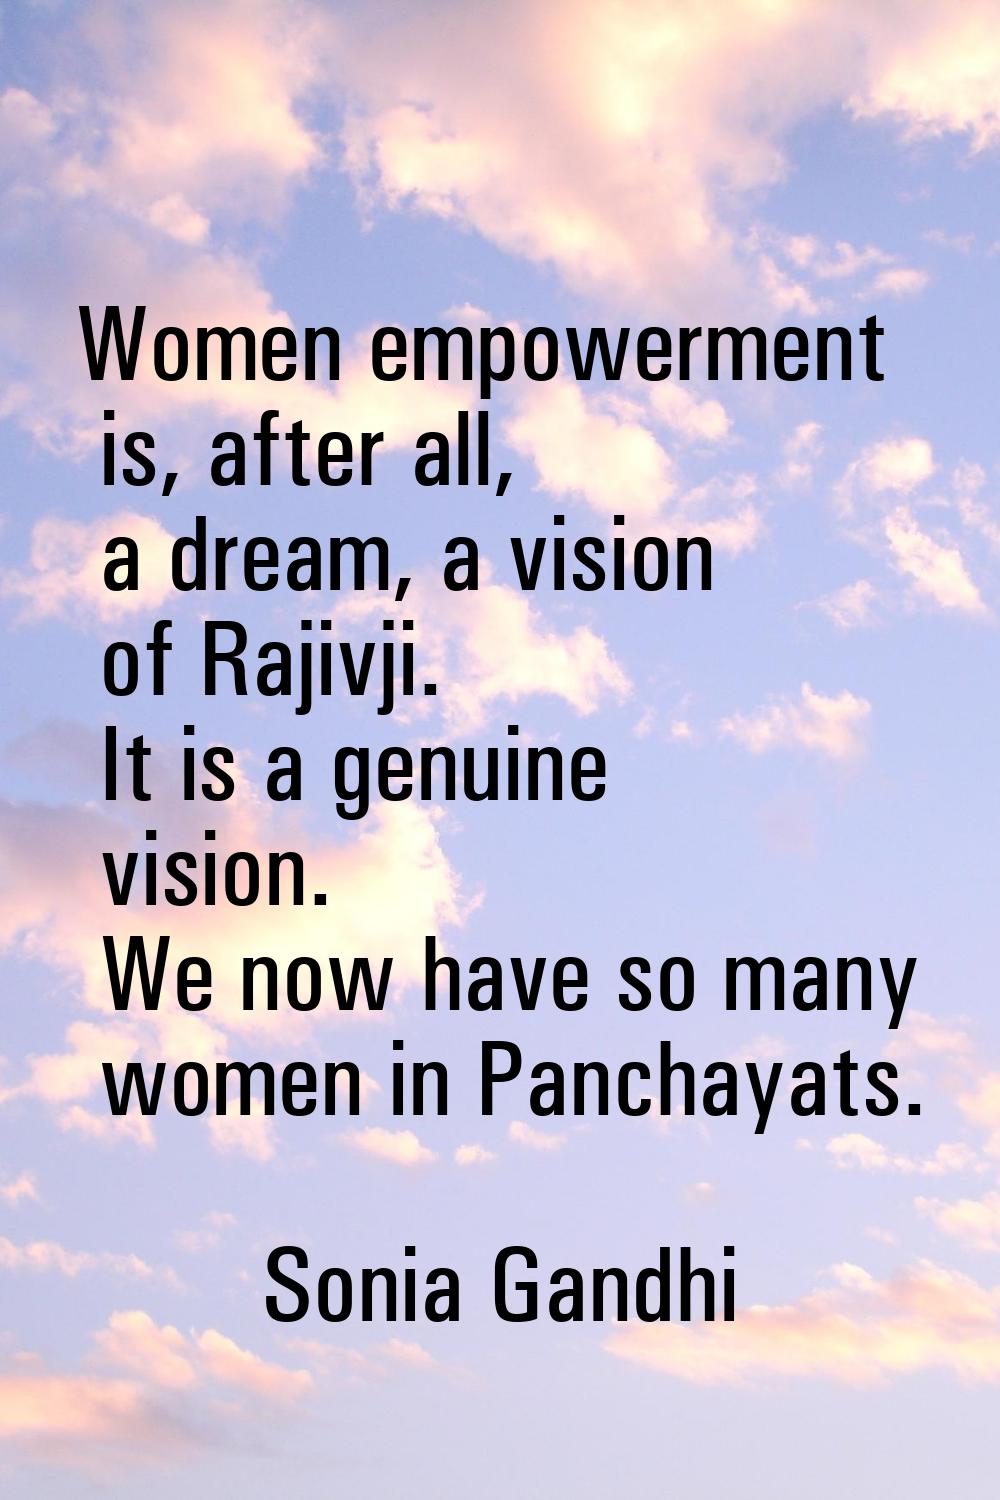 Women empowerment is, after all, a dream, a vision of Rajivji. It is a genuine vision. We now have 